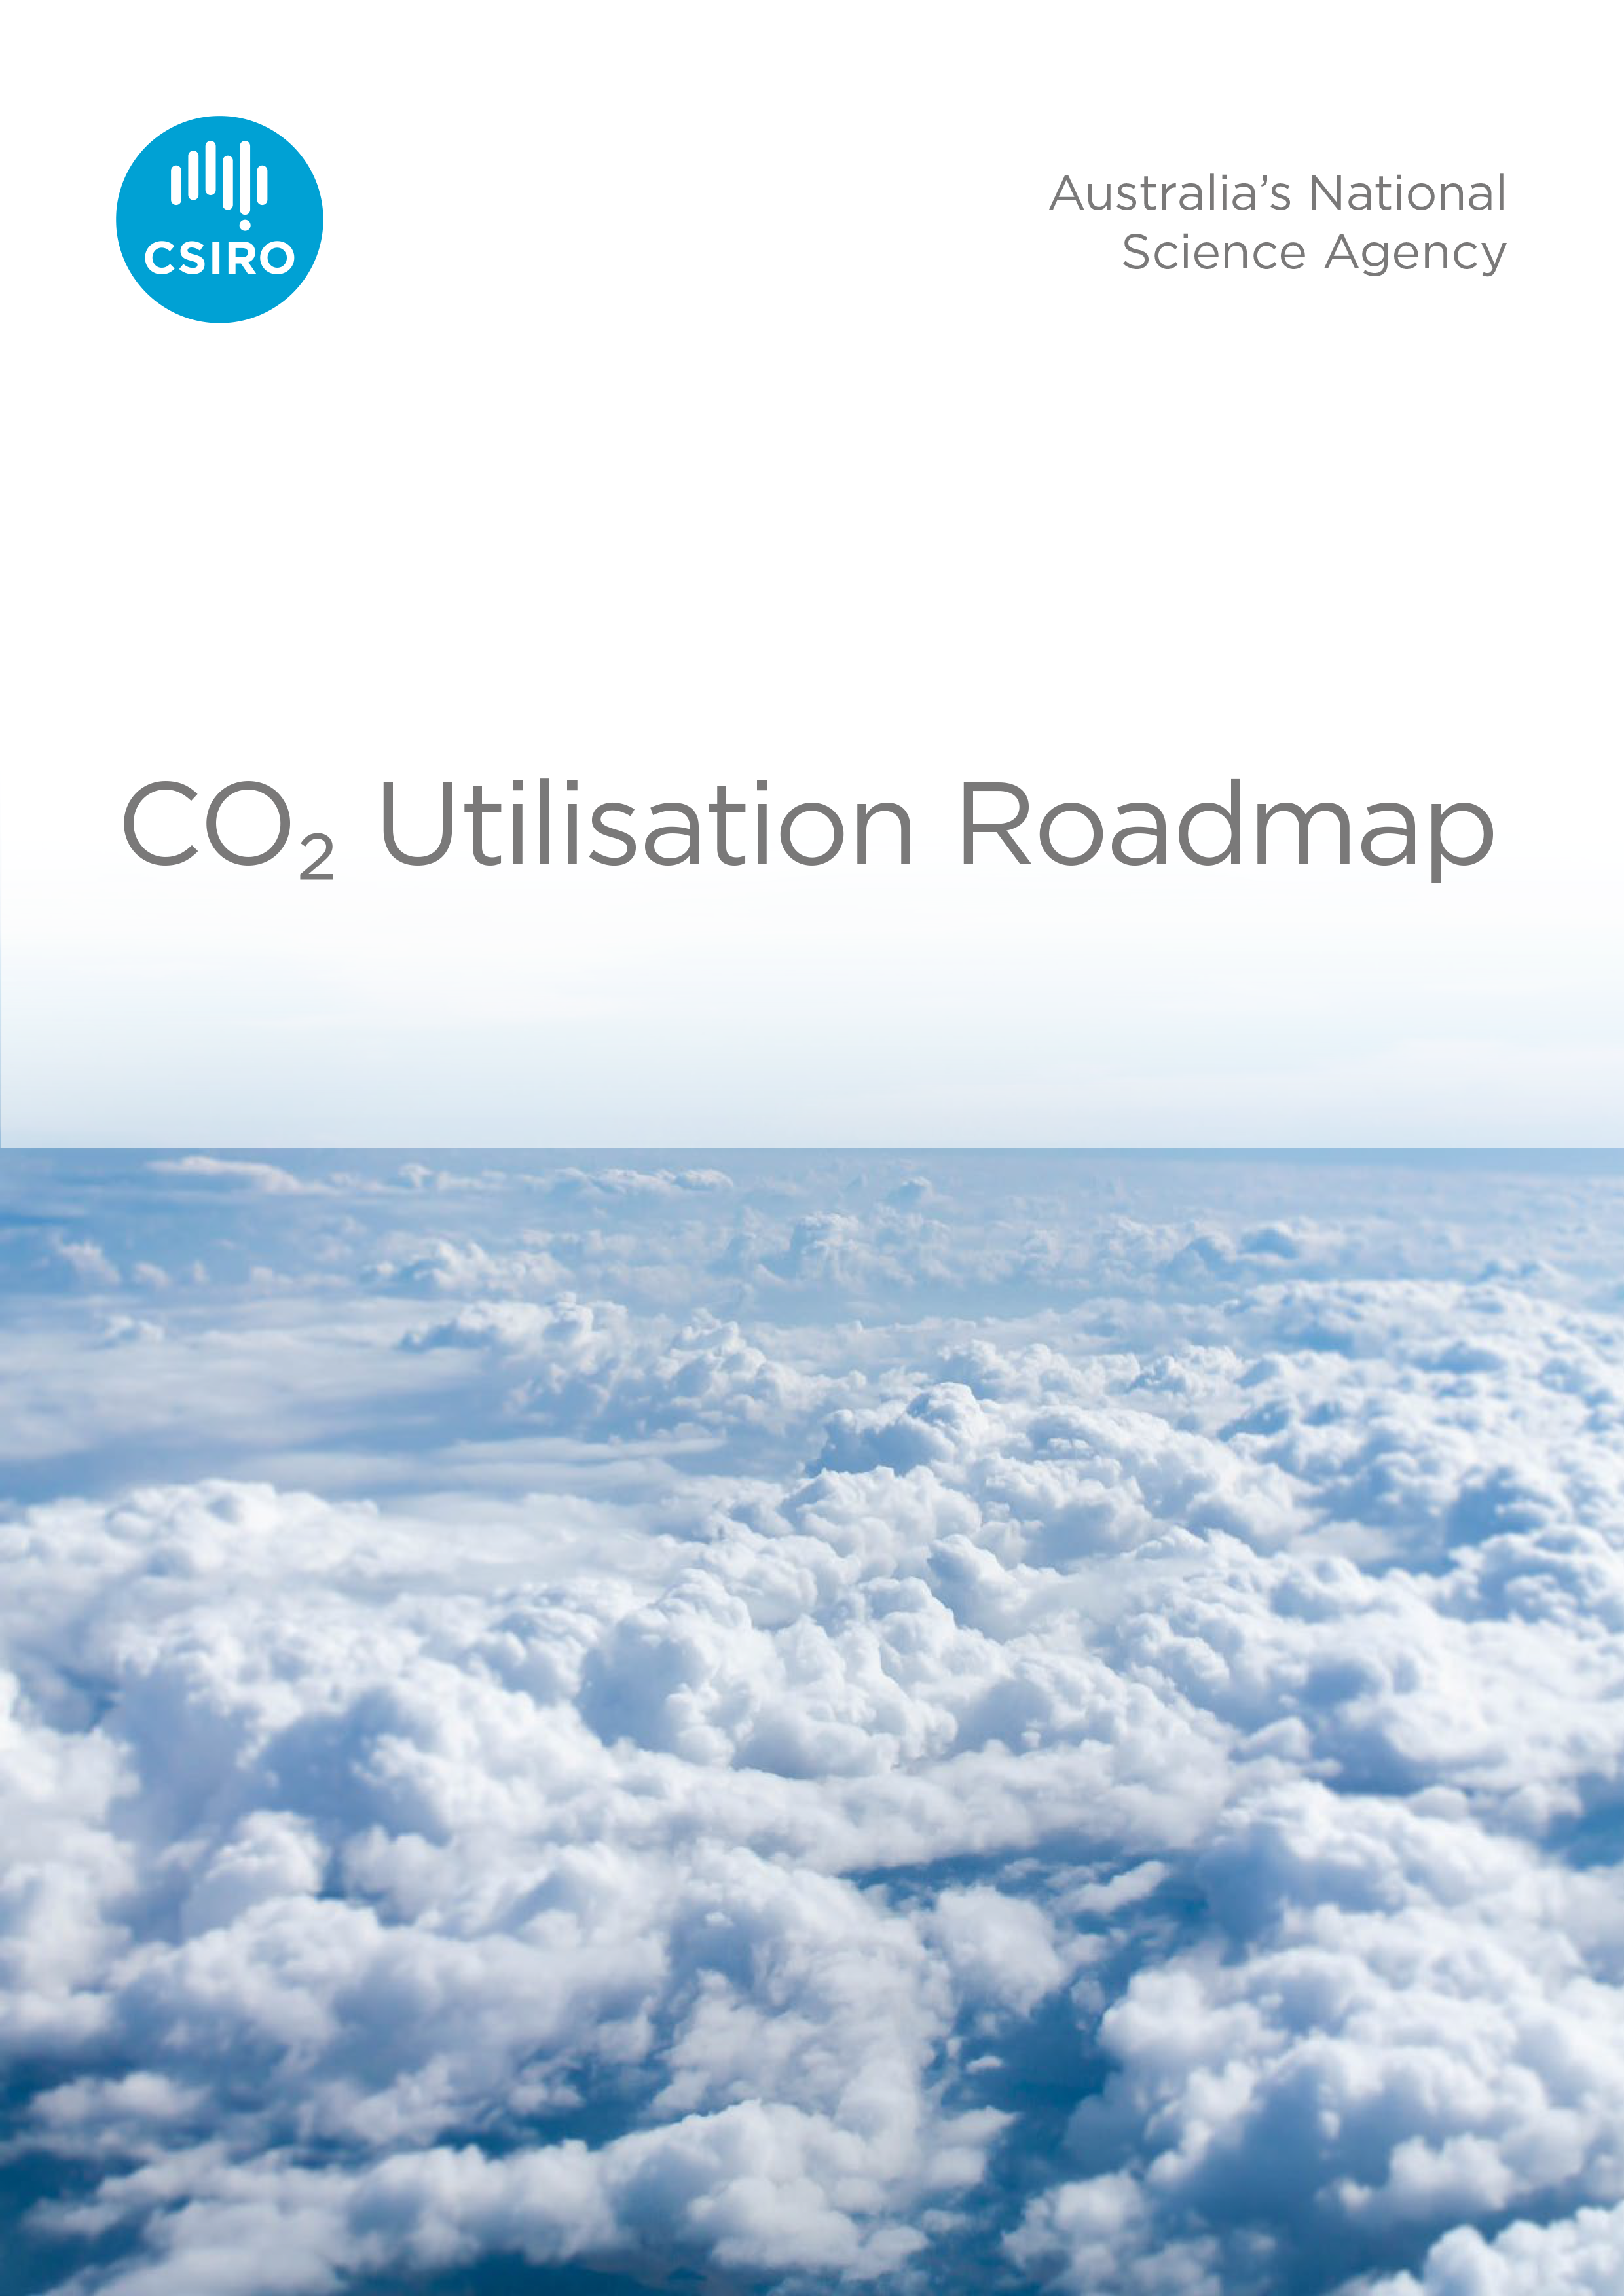 The front cover of CSIRO's CO2 Utilisation Roadmap showing the report title, CSIRO's logo and an image of clouds in a blue sky.